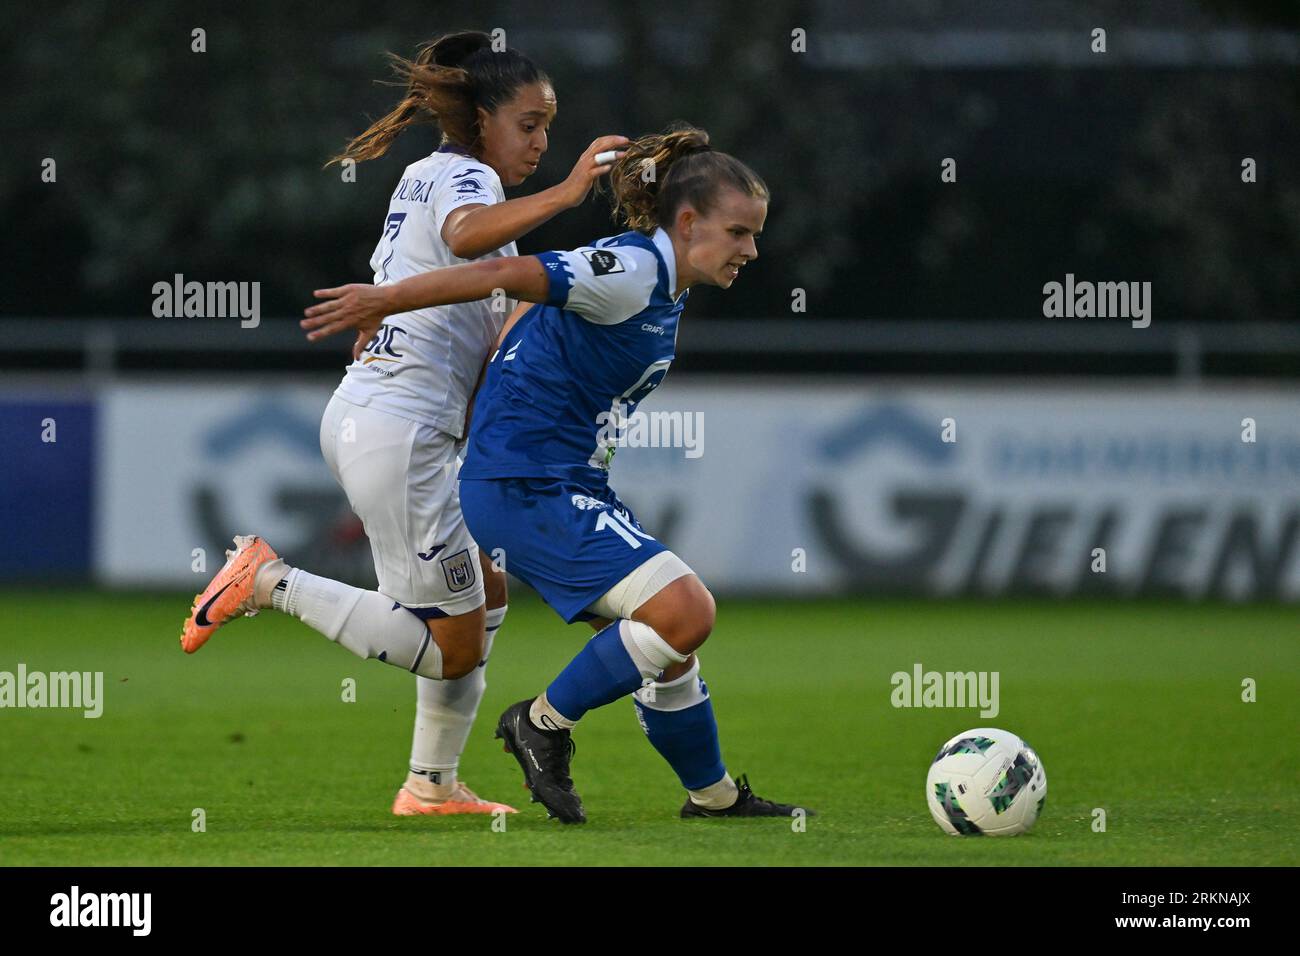 Esther Buabadi (24) of Anderlecht pictured fighting for the ball